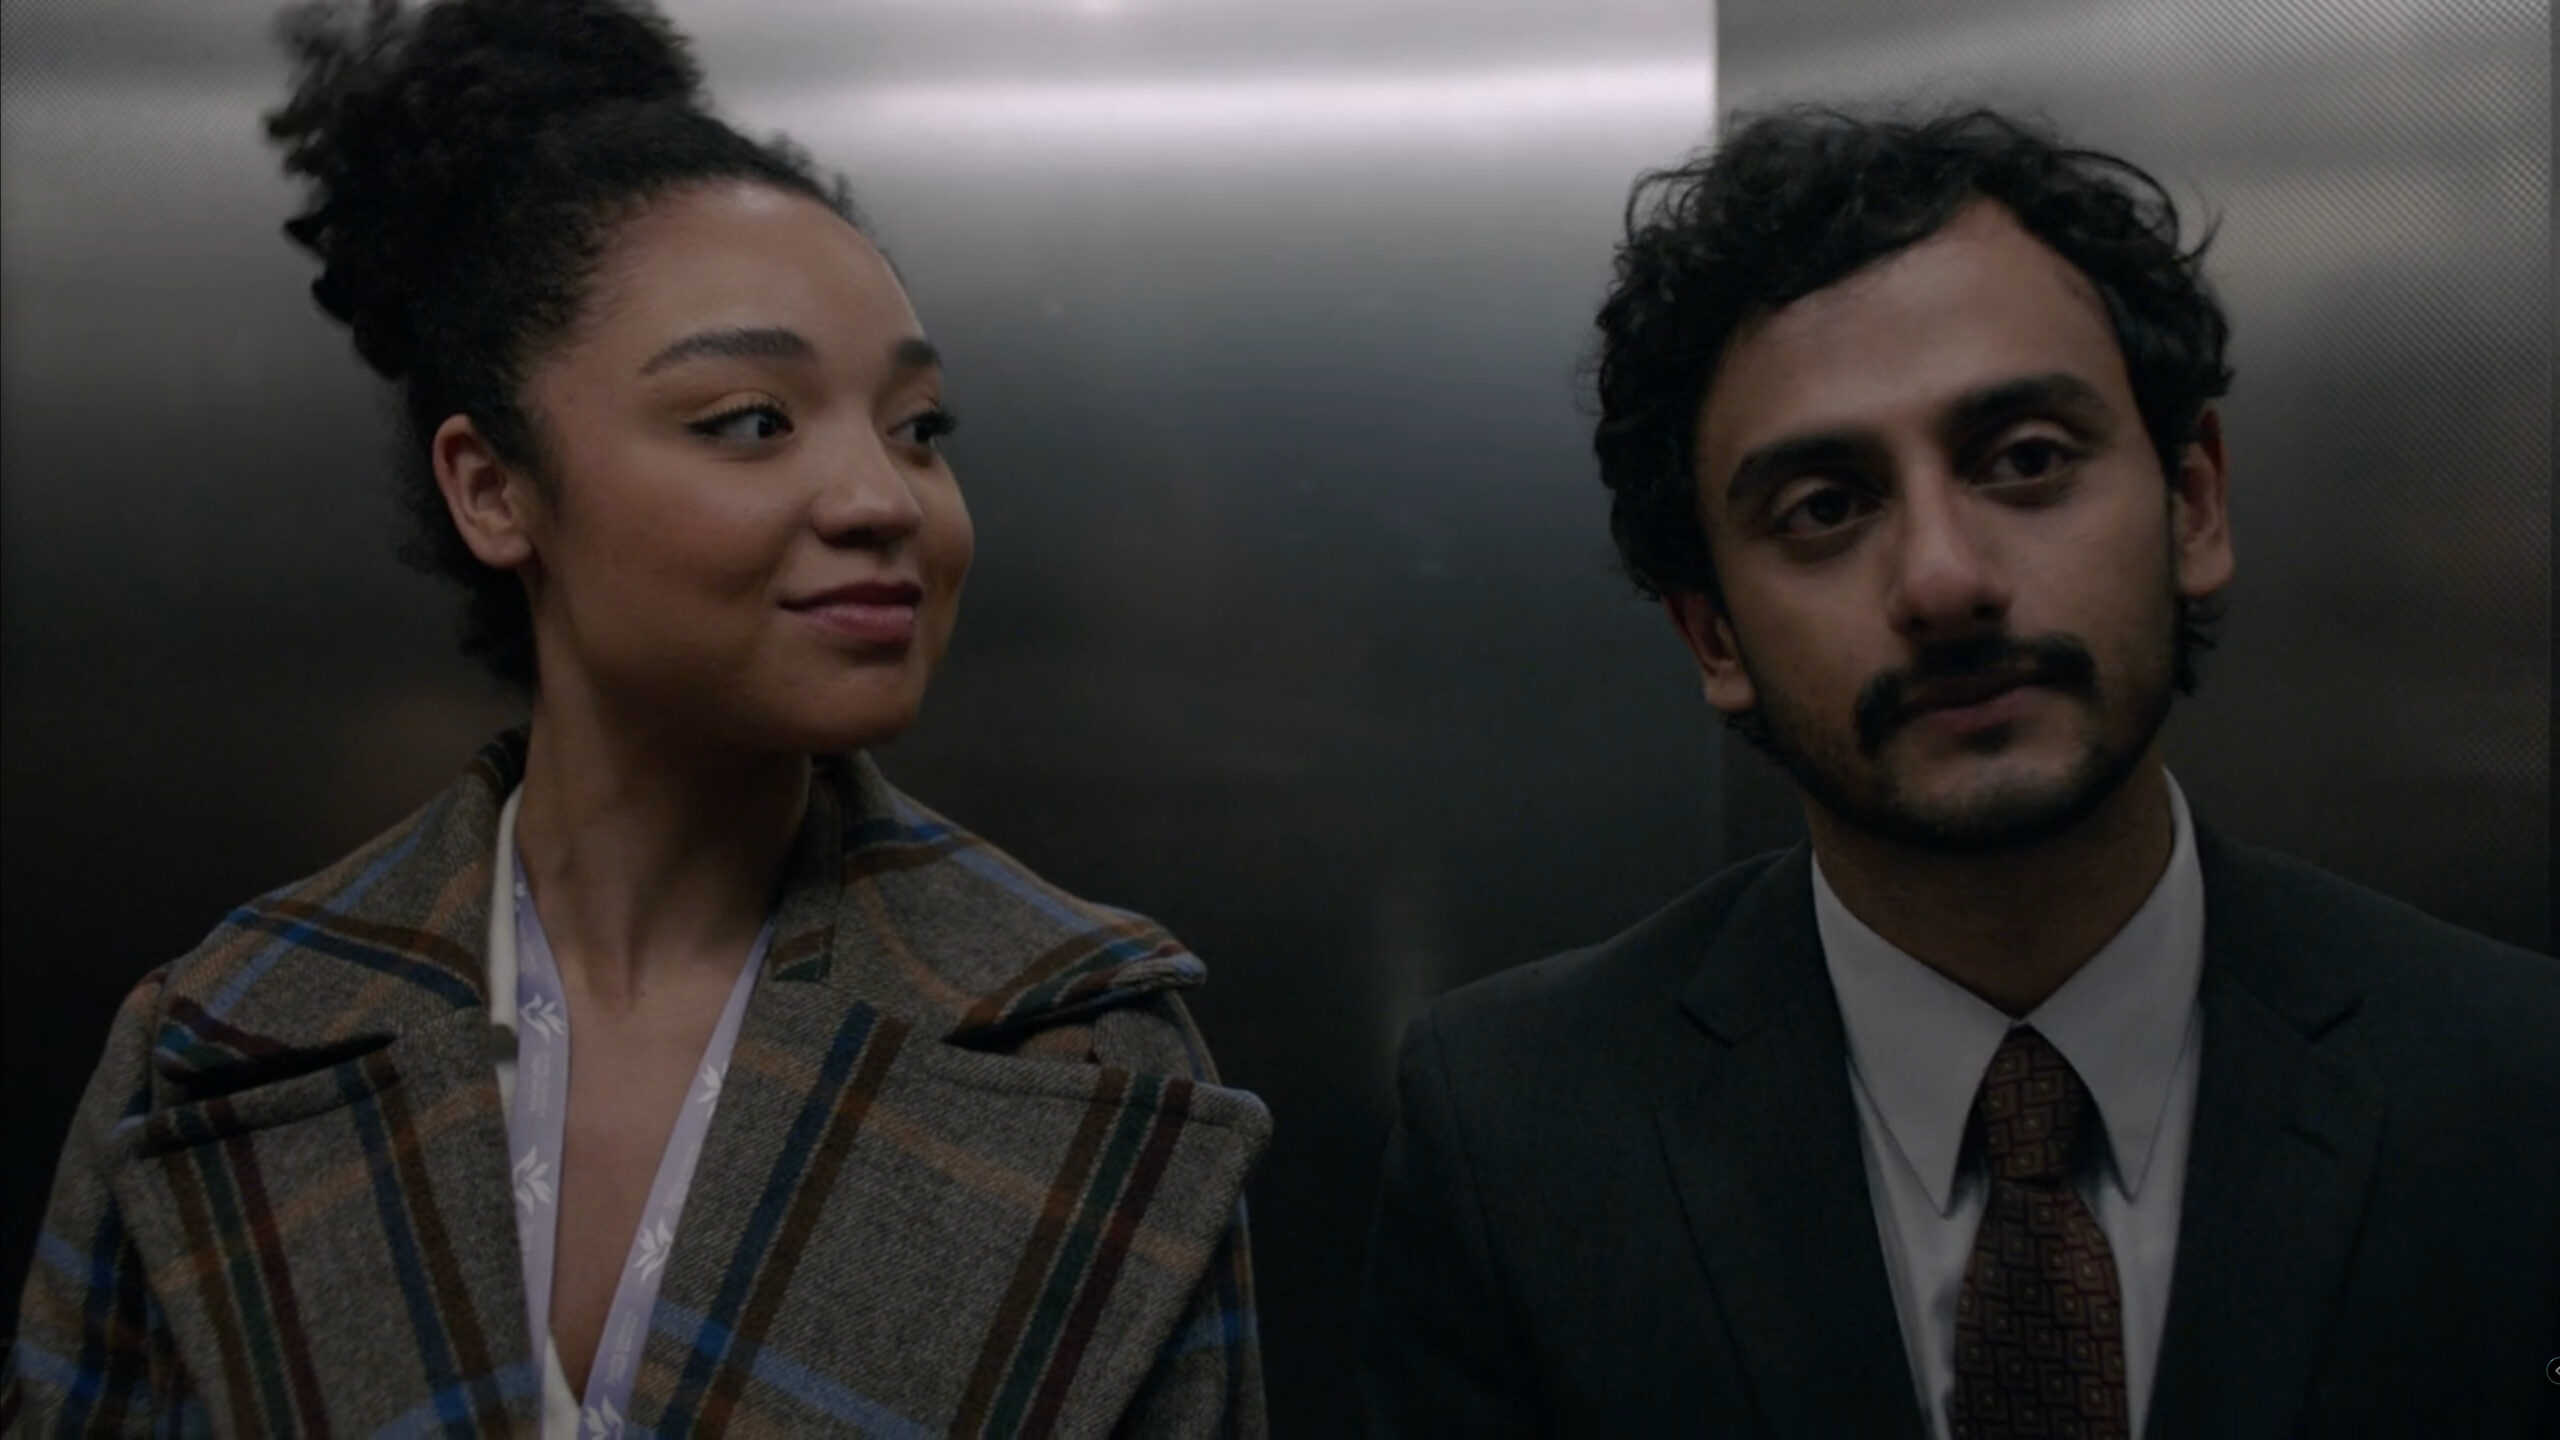 Phoebe and David (Arka Das) in a elevator together